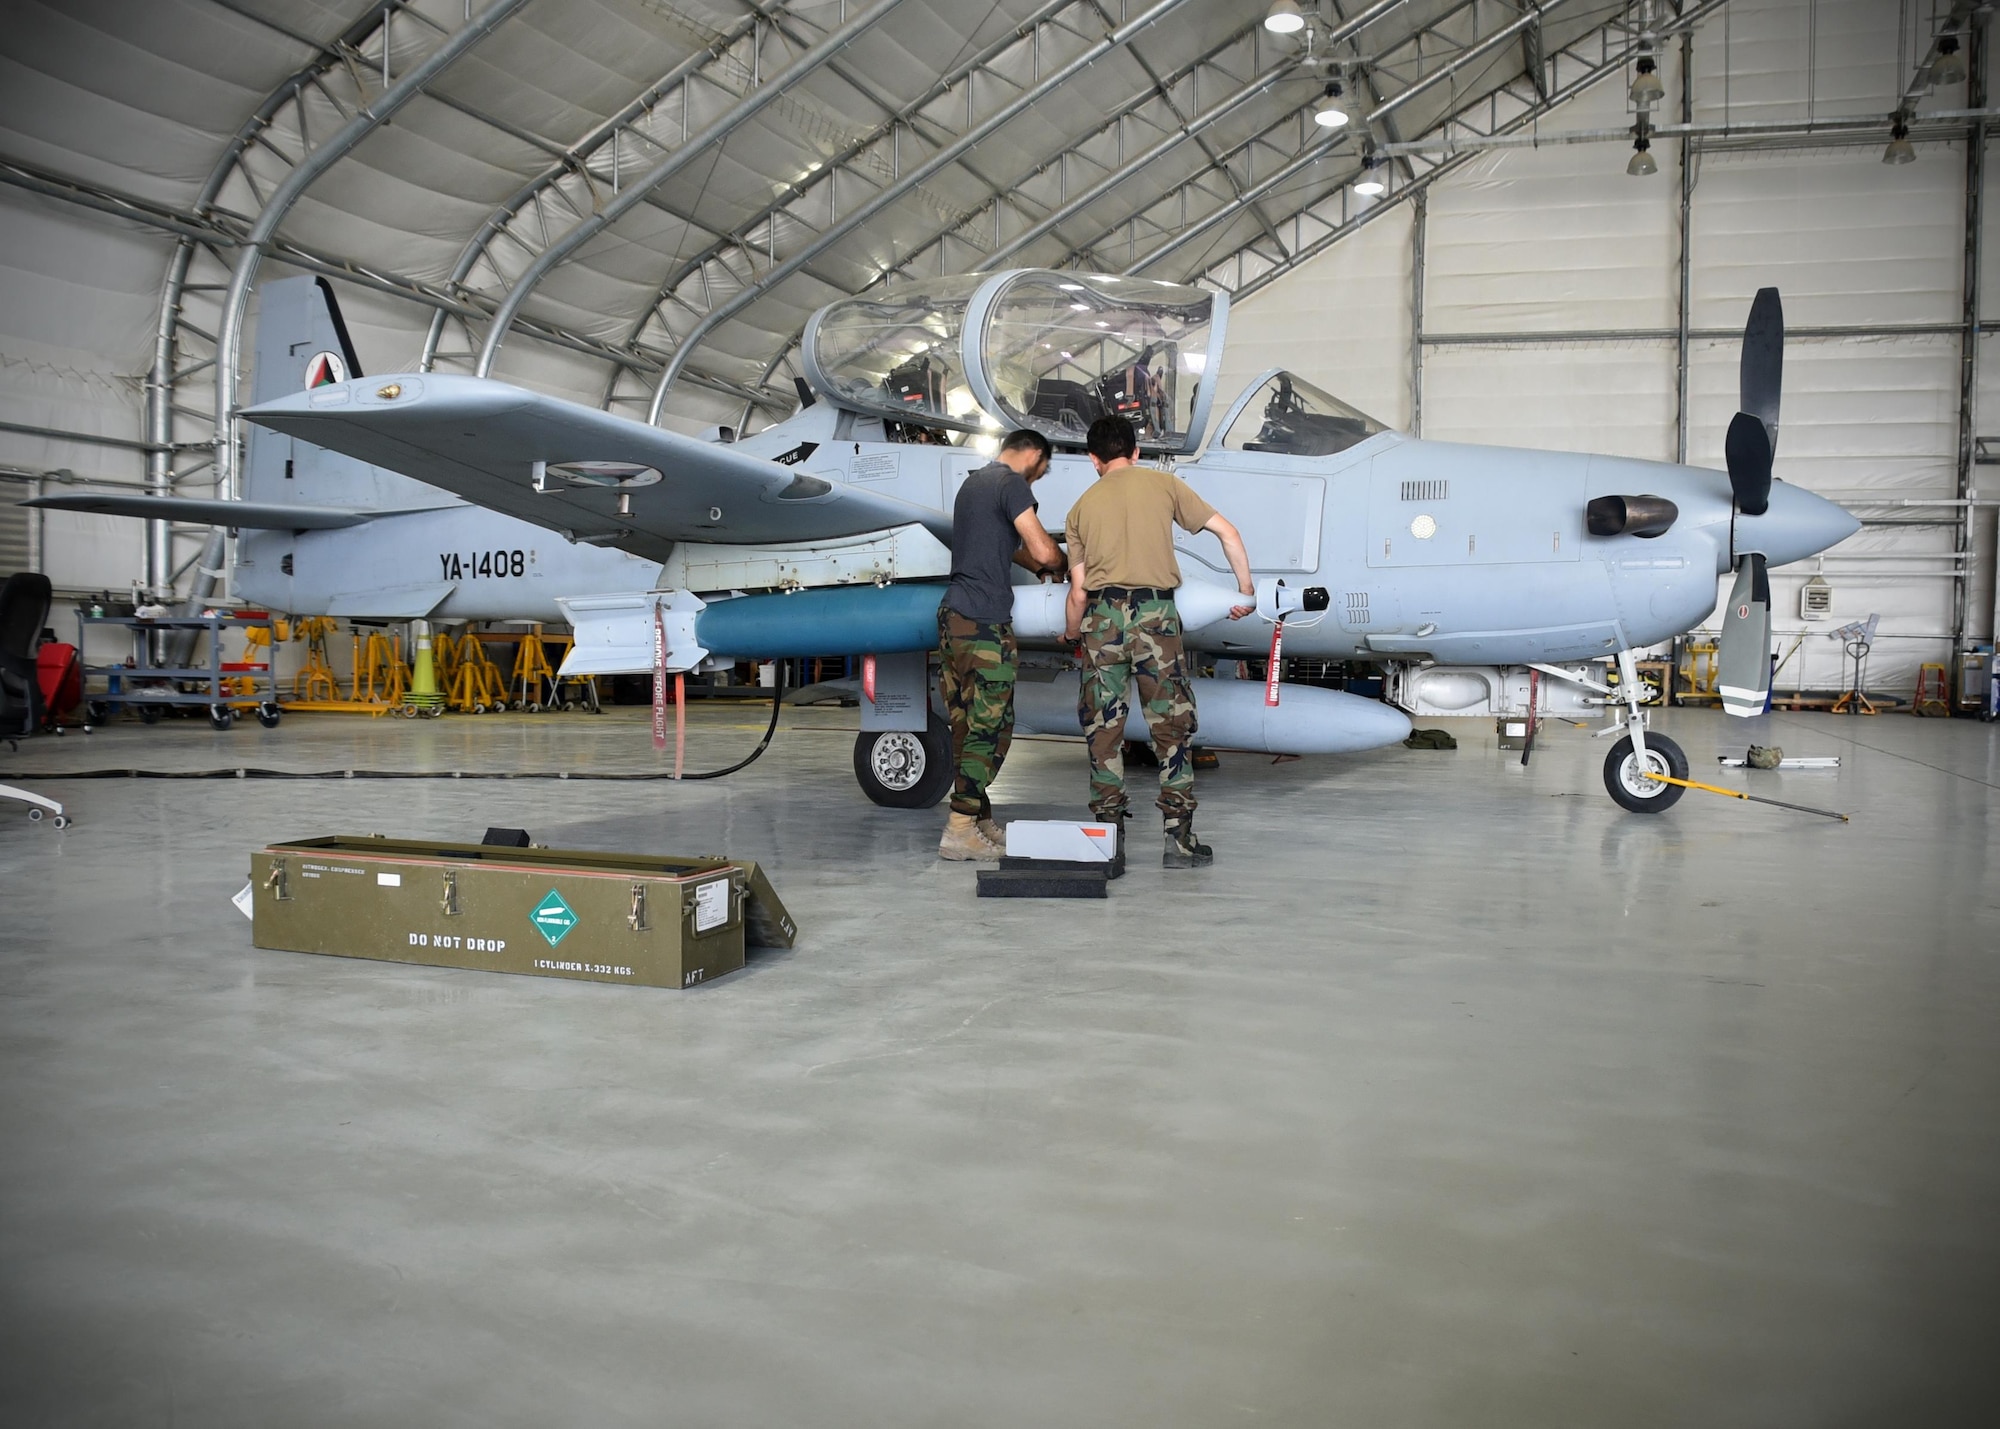 Two Afghan Air Force A-29 Super Tucano maintainers download GBU-12s (Guided Bomb Unit) at Kabul Air Wing, Afghanistan, July 26, 2017. Recently, AAF A-29 maintenance leadership requested to take full responsibility for flight line maintenance operations from Train, Advise, Assist Command-Air advisors and contract maintenance. This initiative by the maintainers is another step closer to the AAF becoming a professional, capable and sustainable force. (U.S. Air Force photo by Tech. Sgt. Veronica Pierce)